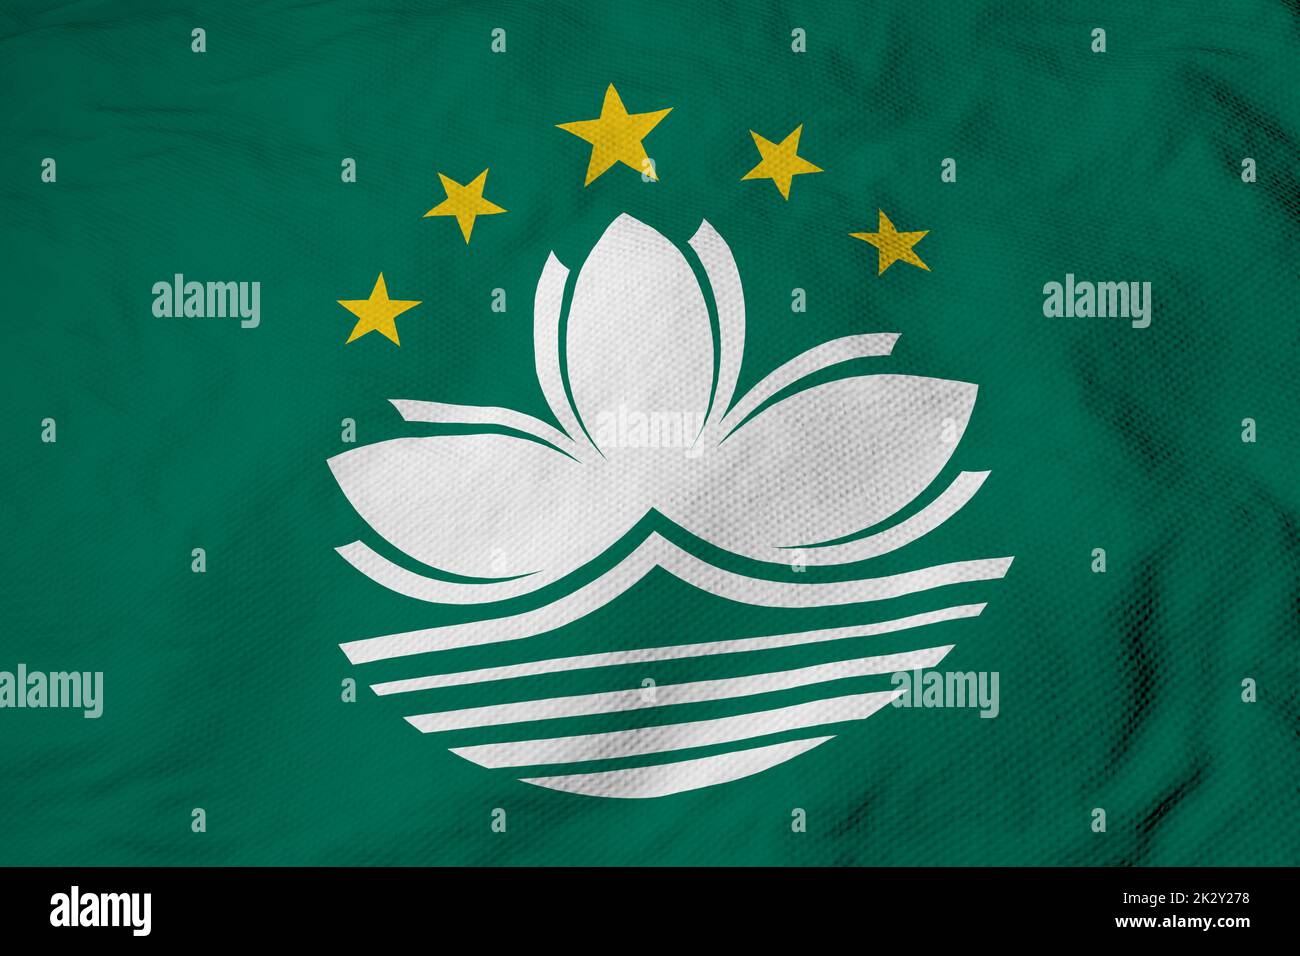 Full frame close-up on a waving Flag of Macau in 3D rendering. Stock Photo